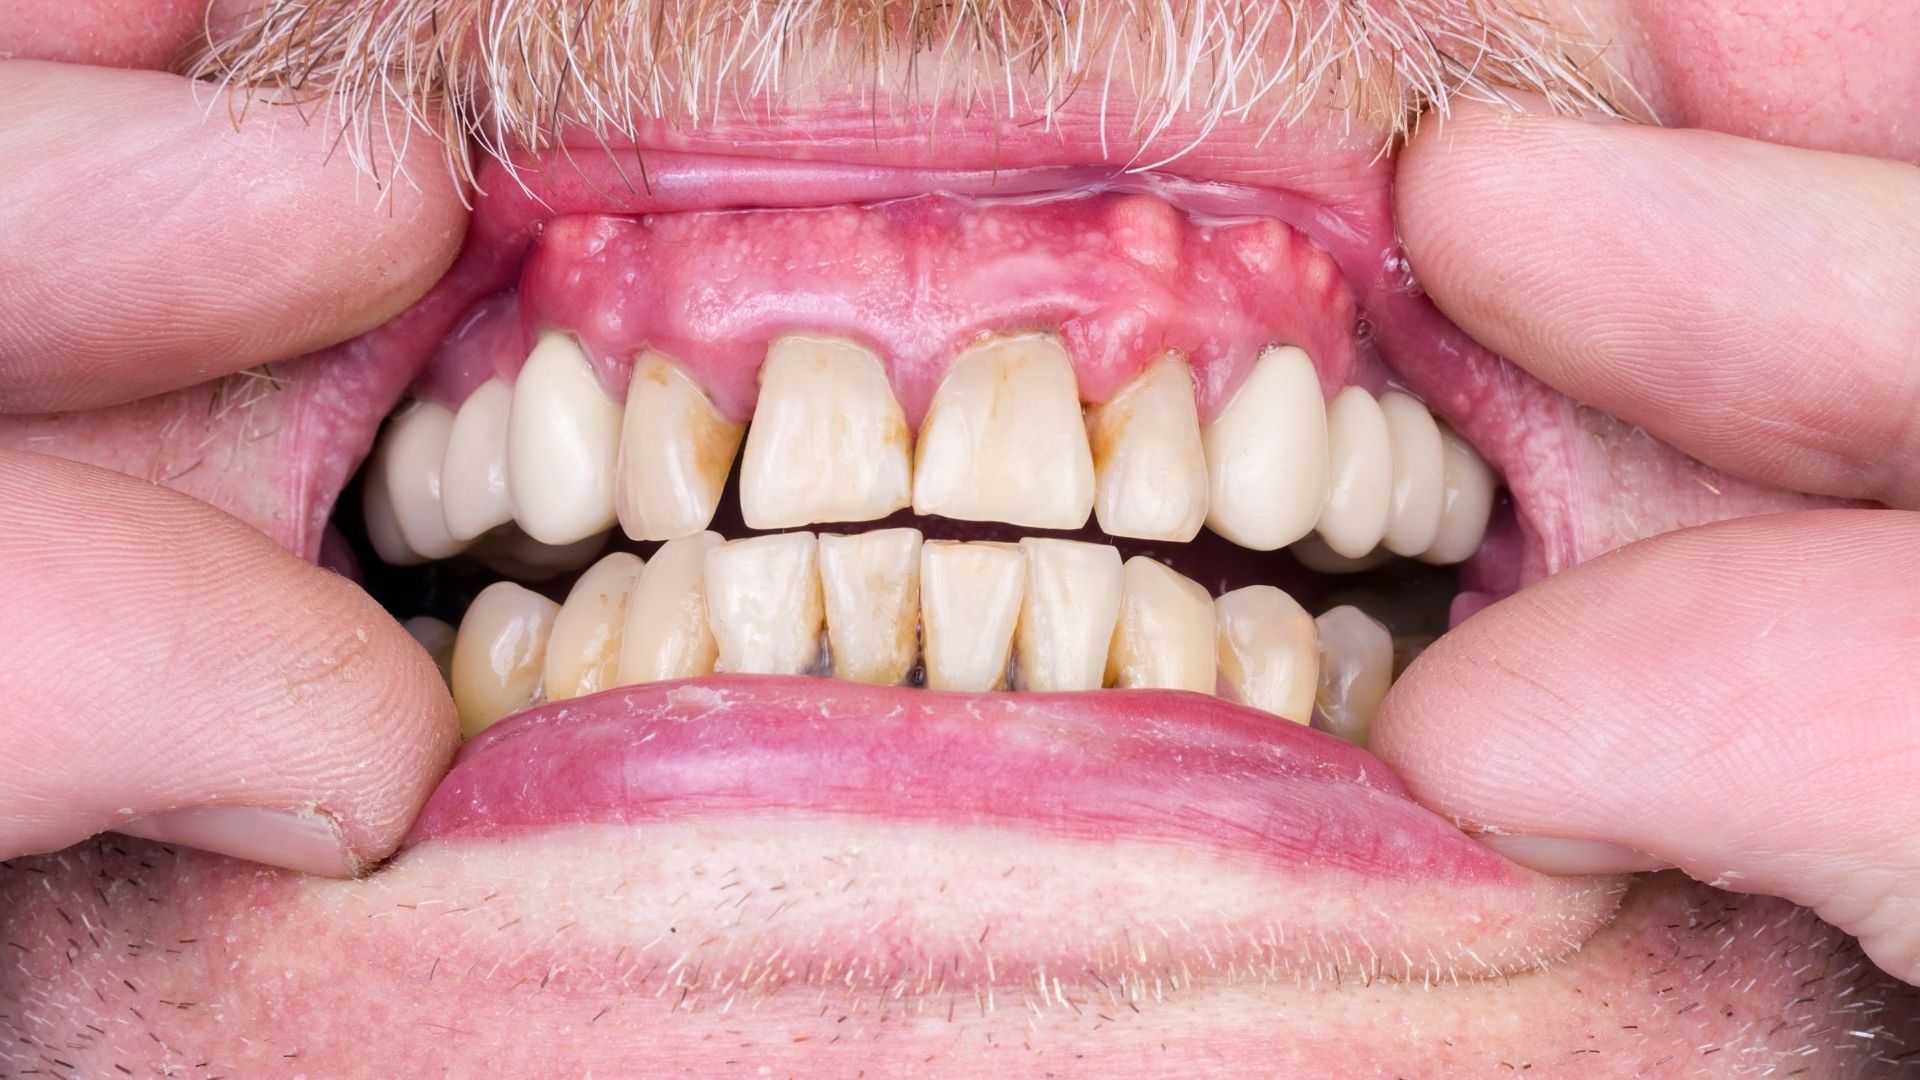 an image showing worn out teeth and gums Full Mouth Rehabilitation in Chandigarh